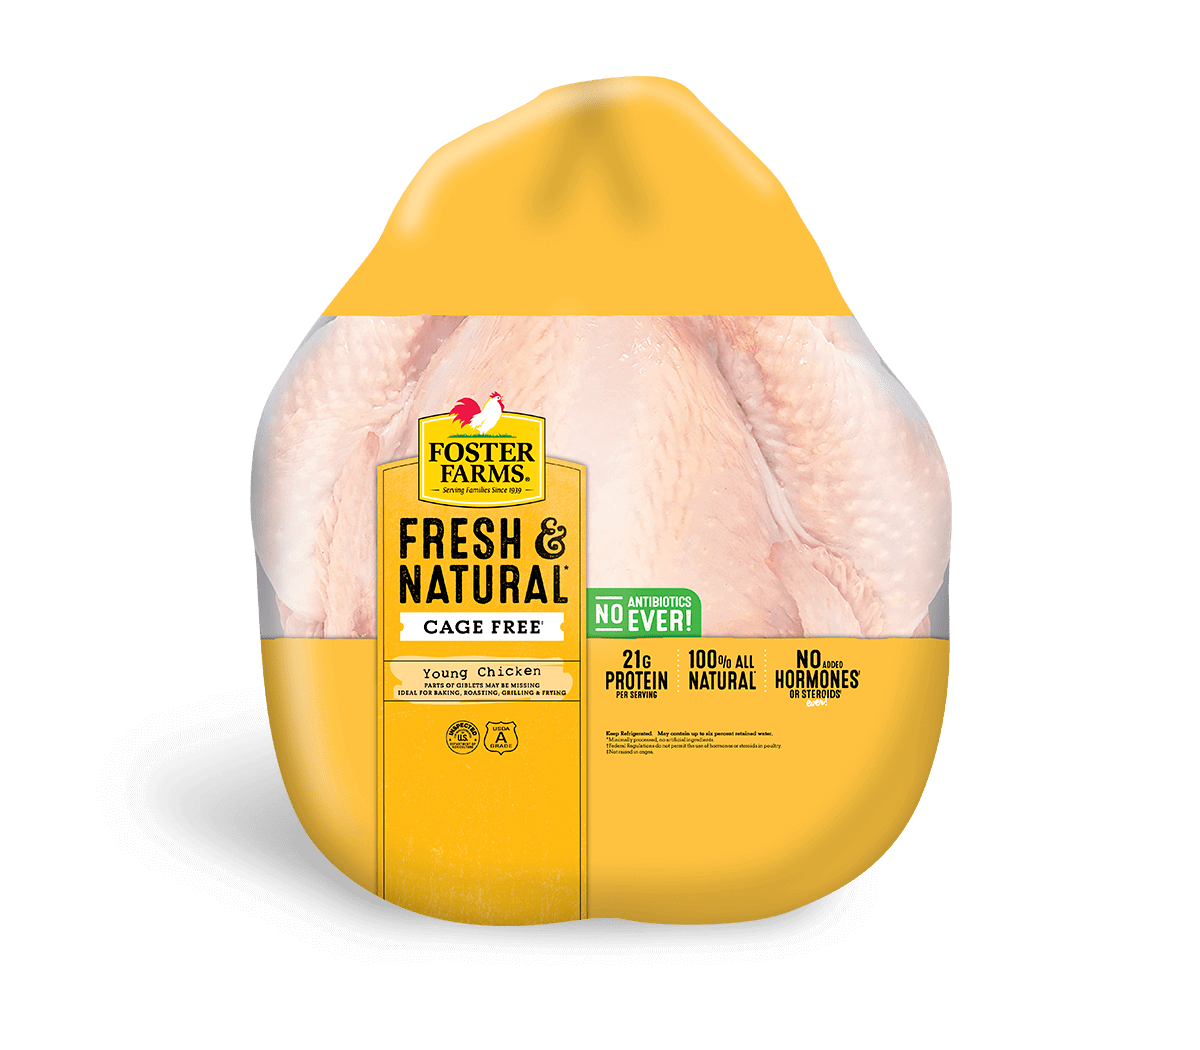 https://www.fosterfarms.com/wp-content/uploads/805-429-505-824-3824-4805-72705-72805-78705-78805-450868-RTC-CON-YNGCHCKN-BAG_H.png